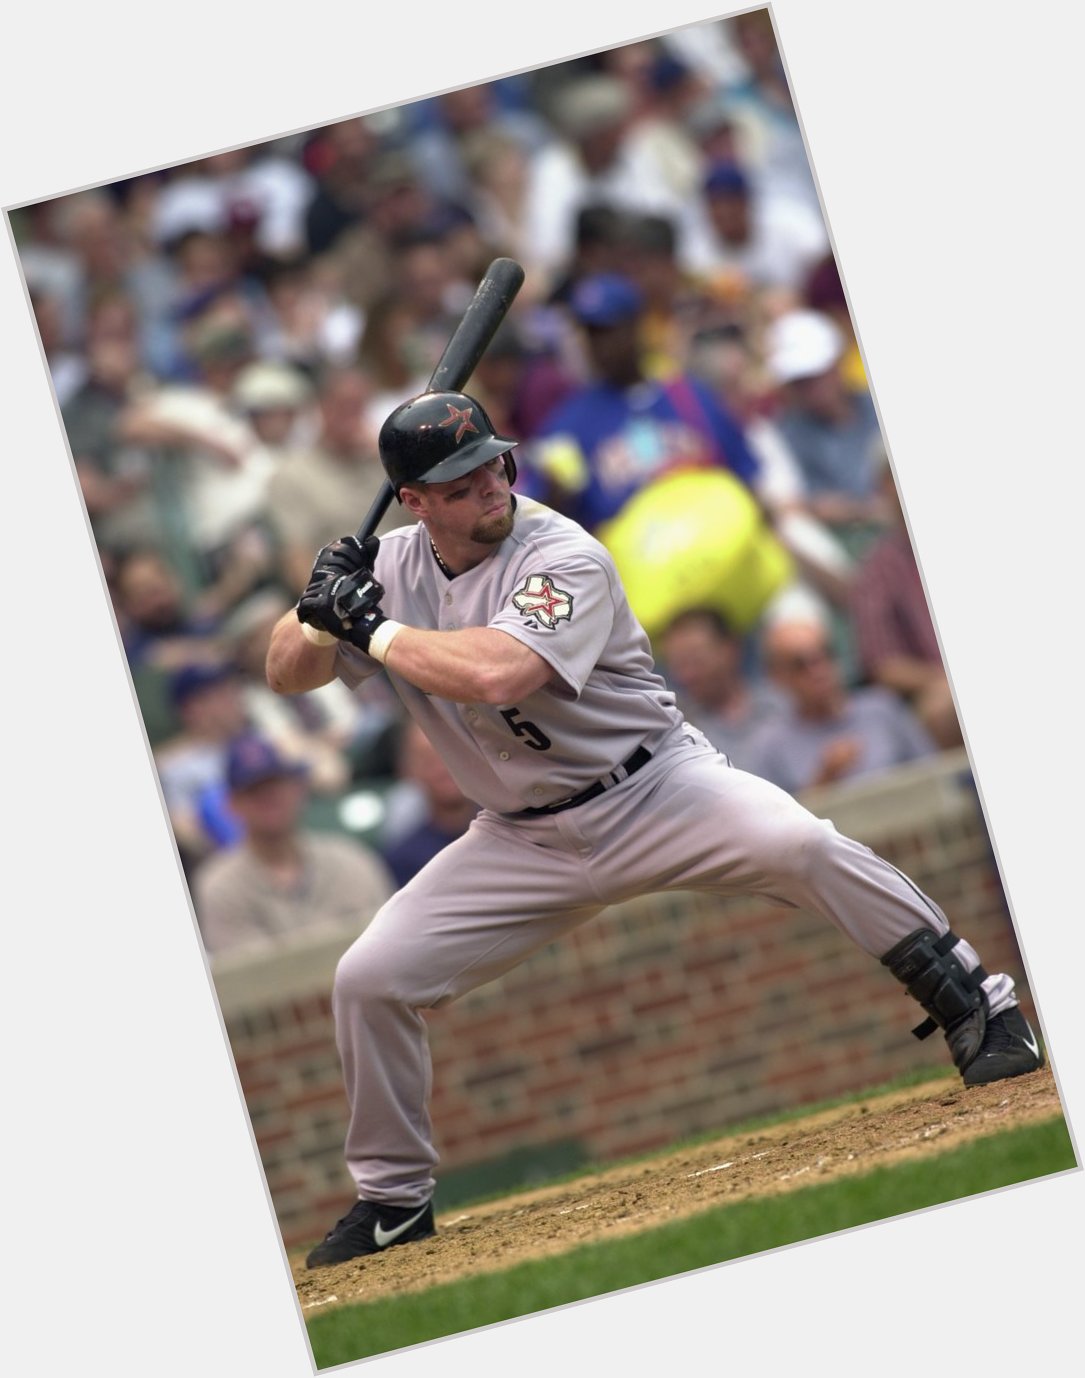 Happy Birthday to Hall of Famer Jeff Bagwell!

He currently holds the franchise record with 449 home runs. 